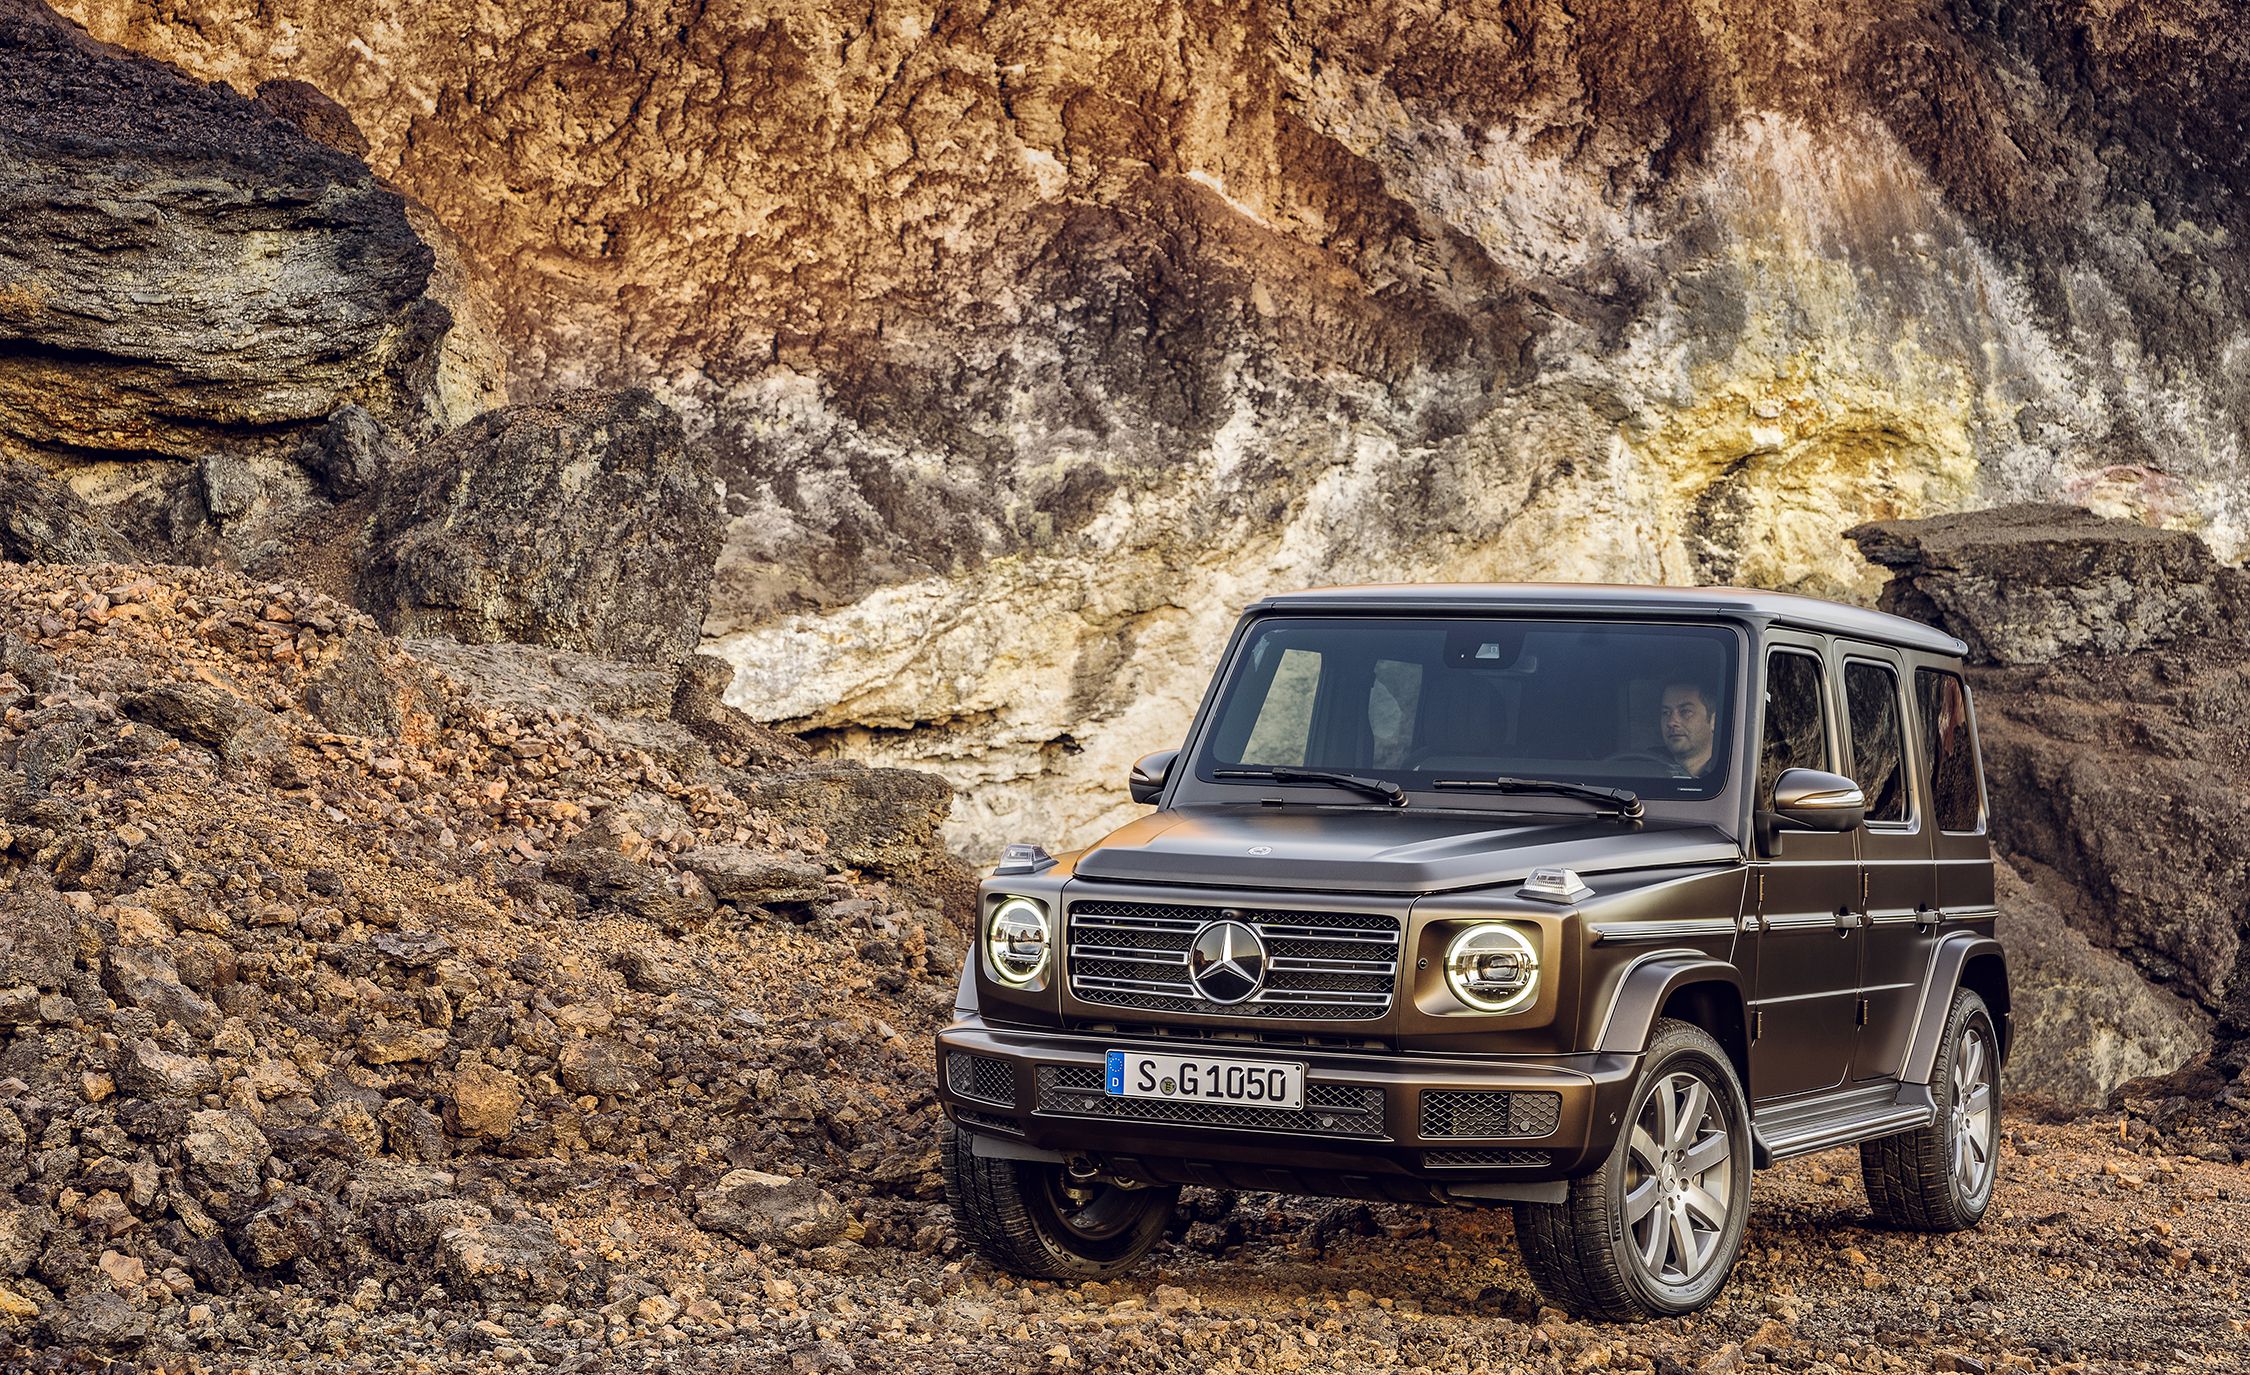 EMC Mercedes-Benz 250GD Is the Most Authentic New G-Wagen